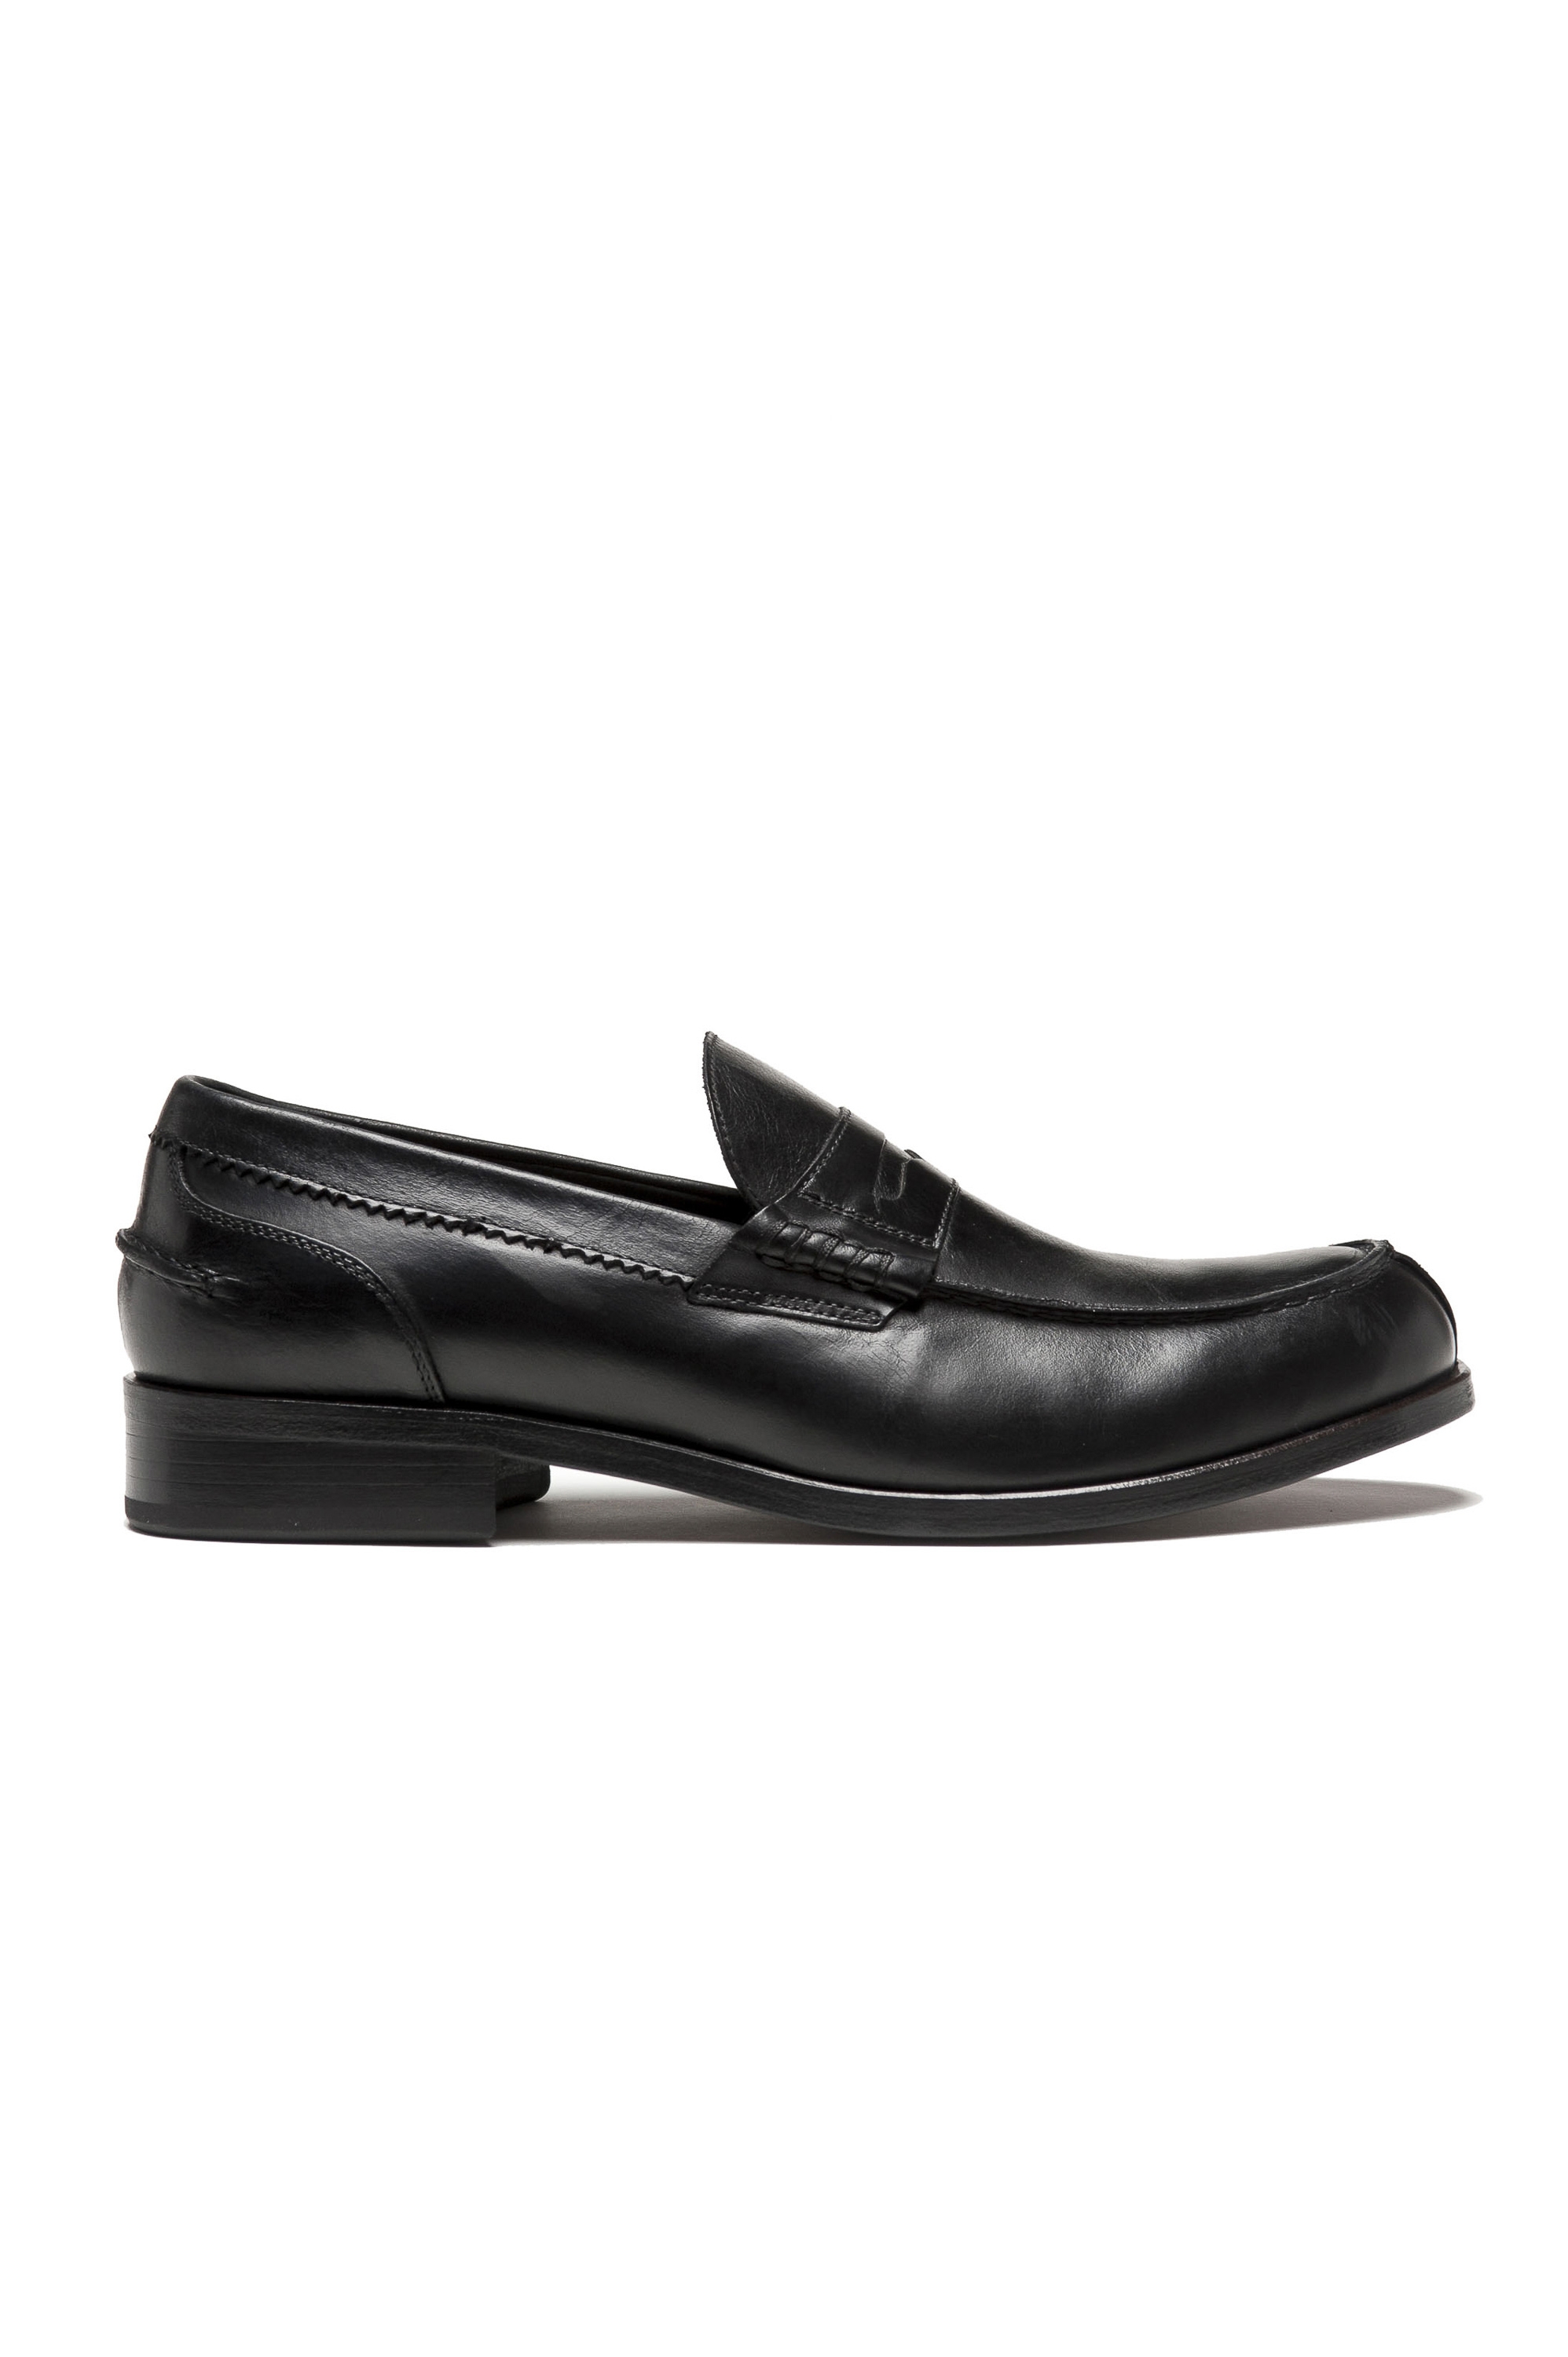 SBU 03203_2021SS Black plain calfskin penny loafers with leather sole 01